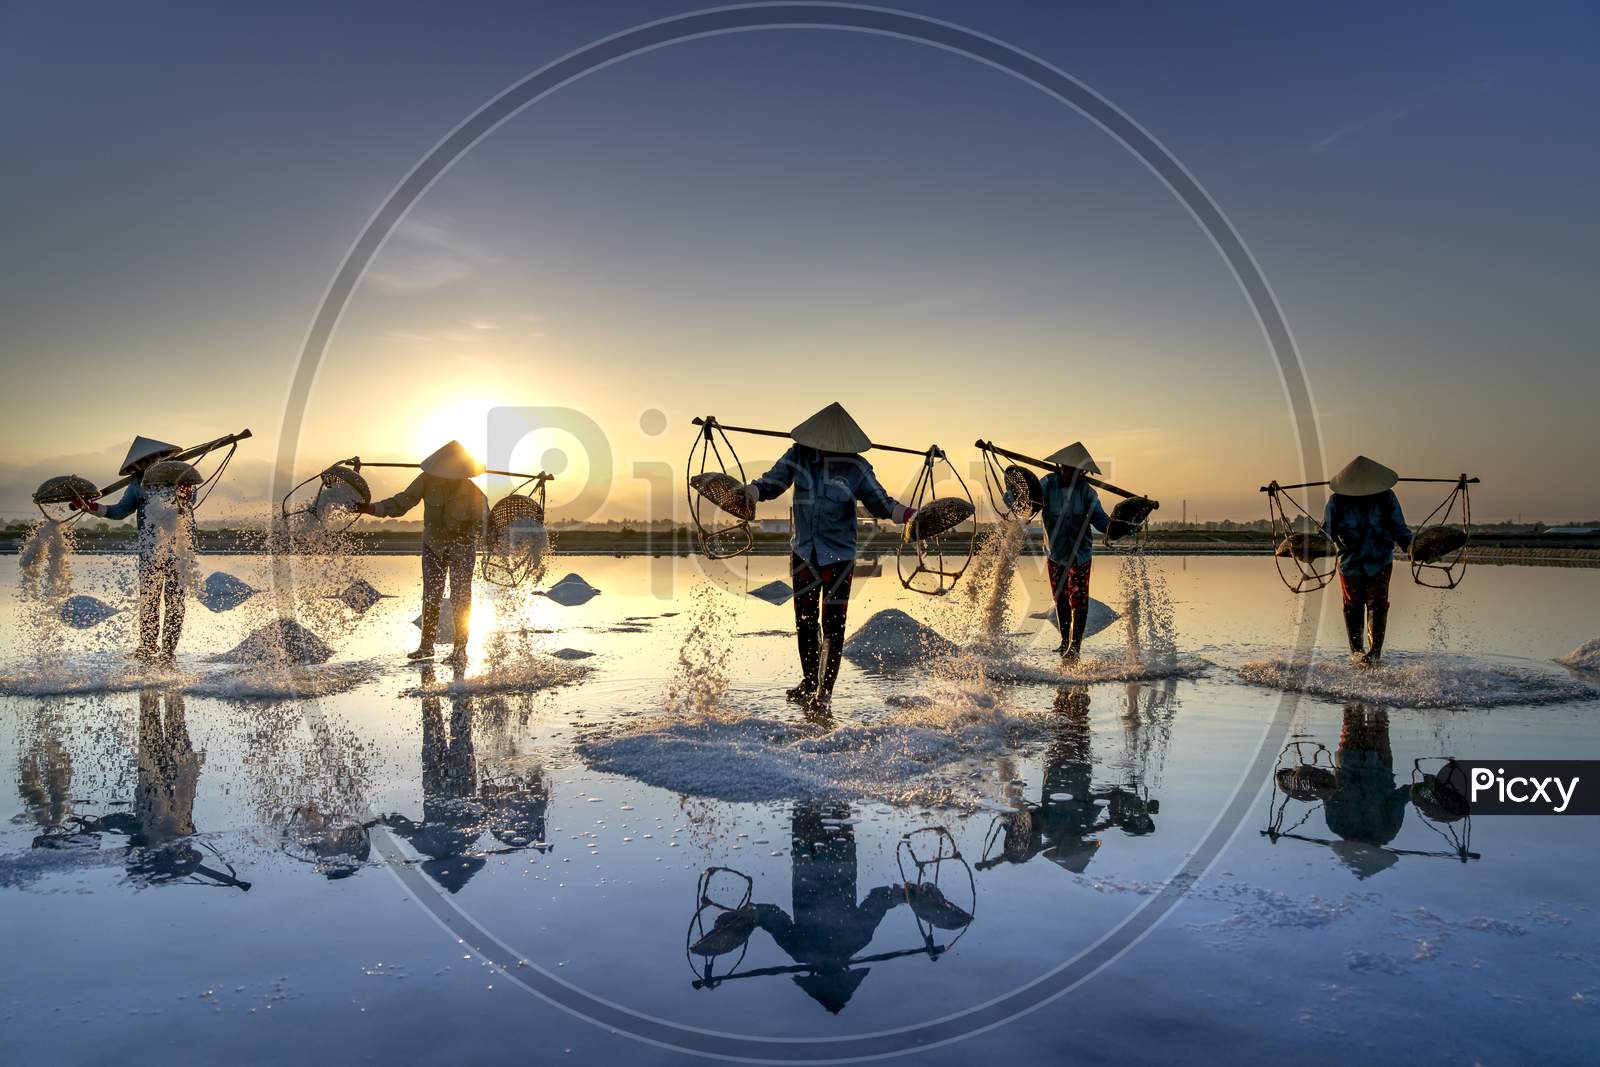 The women are working on the salt field at dawn.